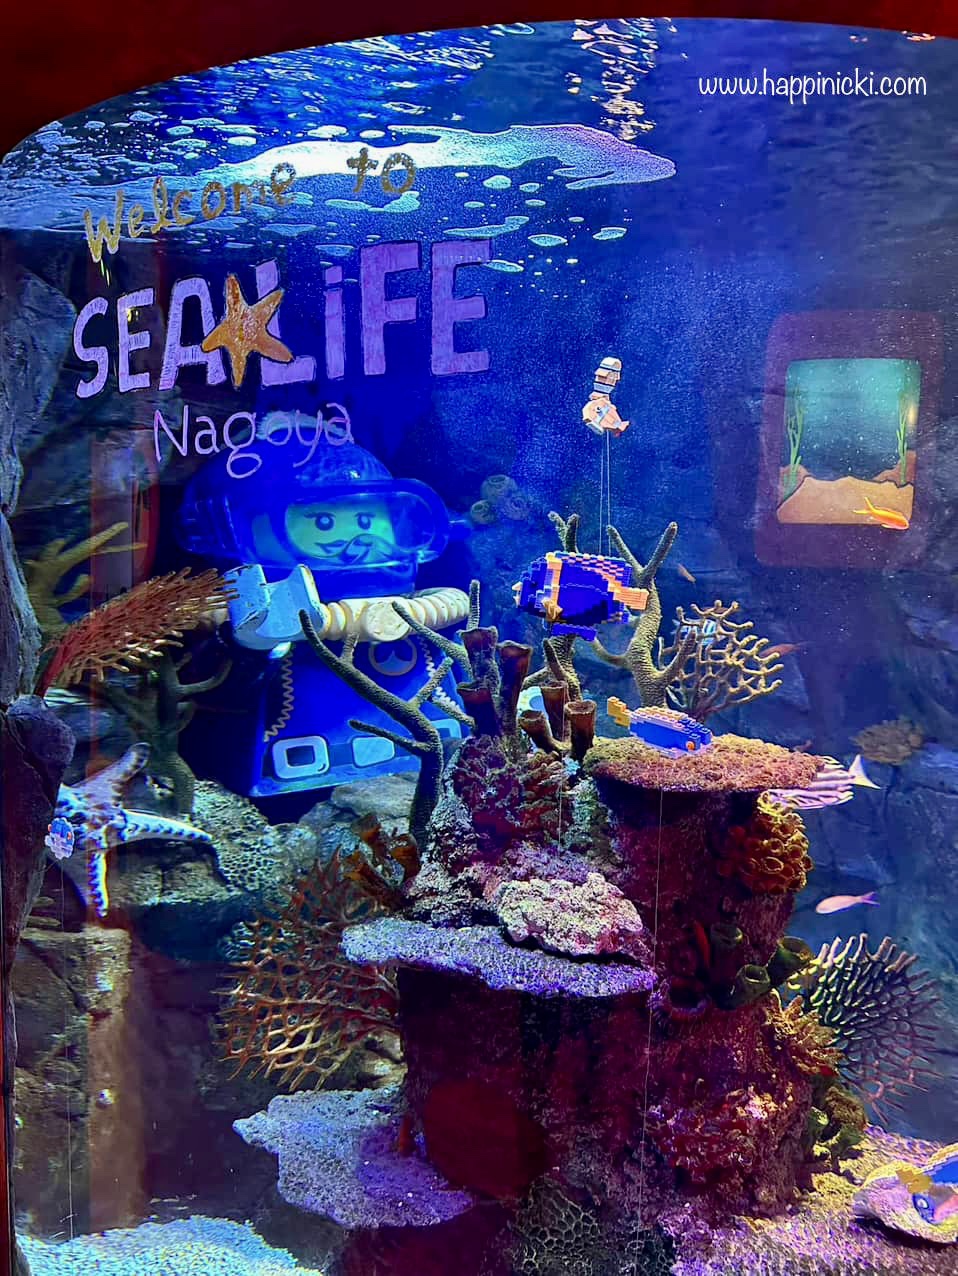 LEGOLAND SEA LIFE Nagoya: Here Are Some of the Best Photos and Videos We’ve Taken